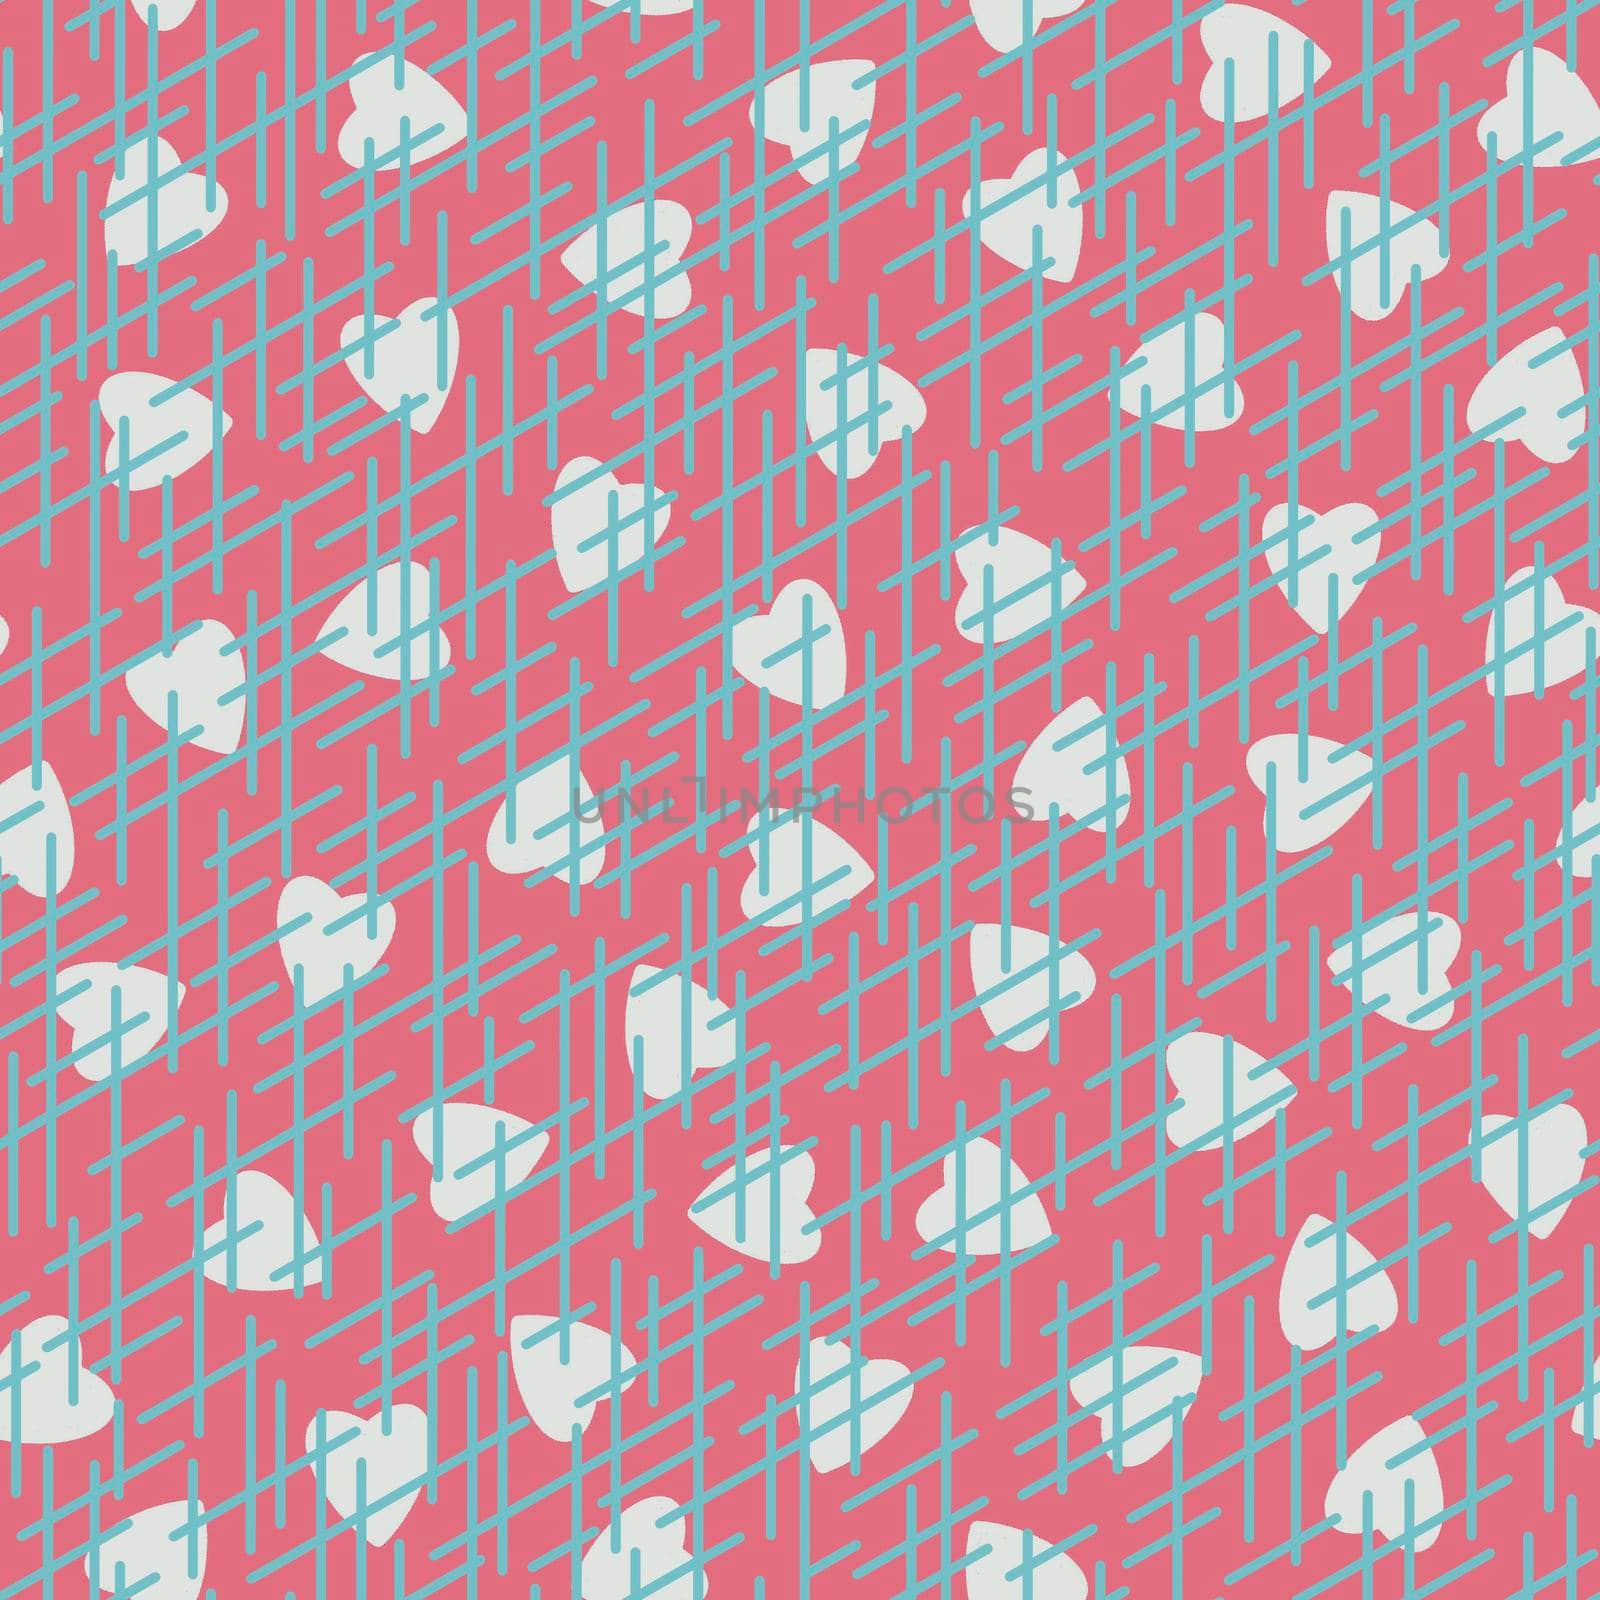 Randomly crossing lines making pattern.Chaotic short lines seamless pattern,chips and sticks modern repeatable motif.Good for print, textile,fabric, background, wrapping paper.Pink azure white colors by Angelsmoon